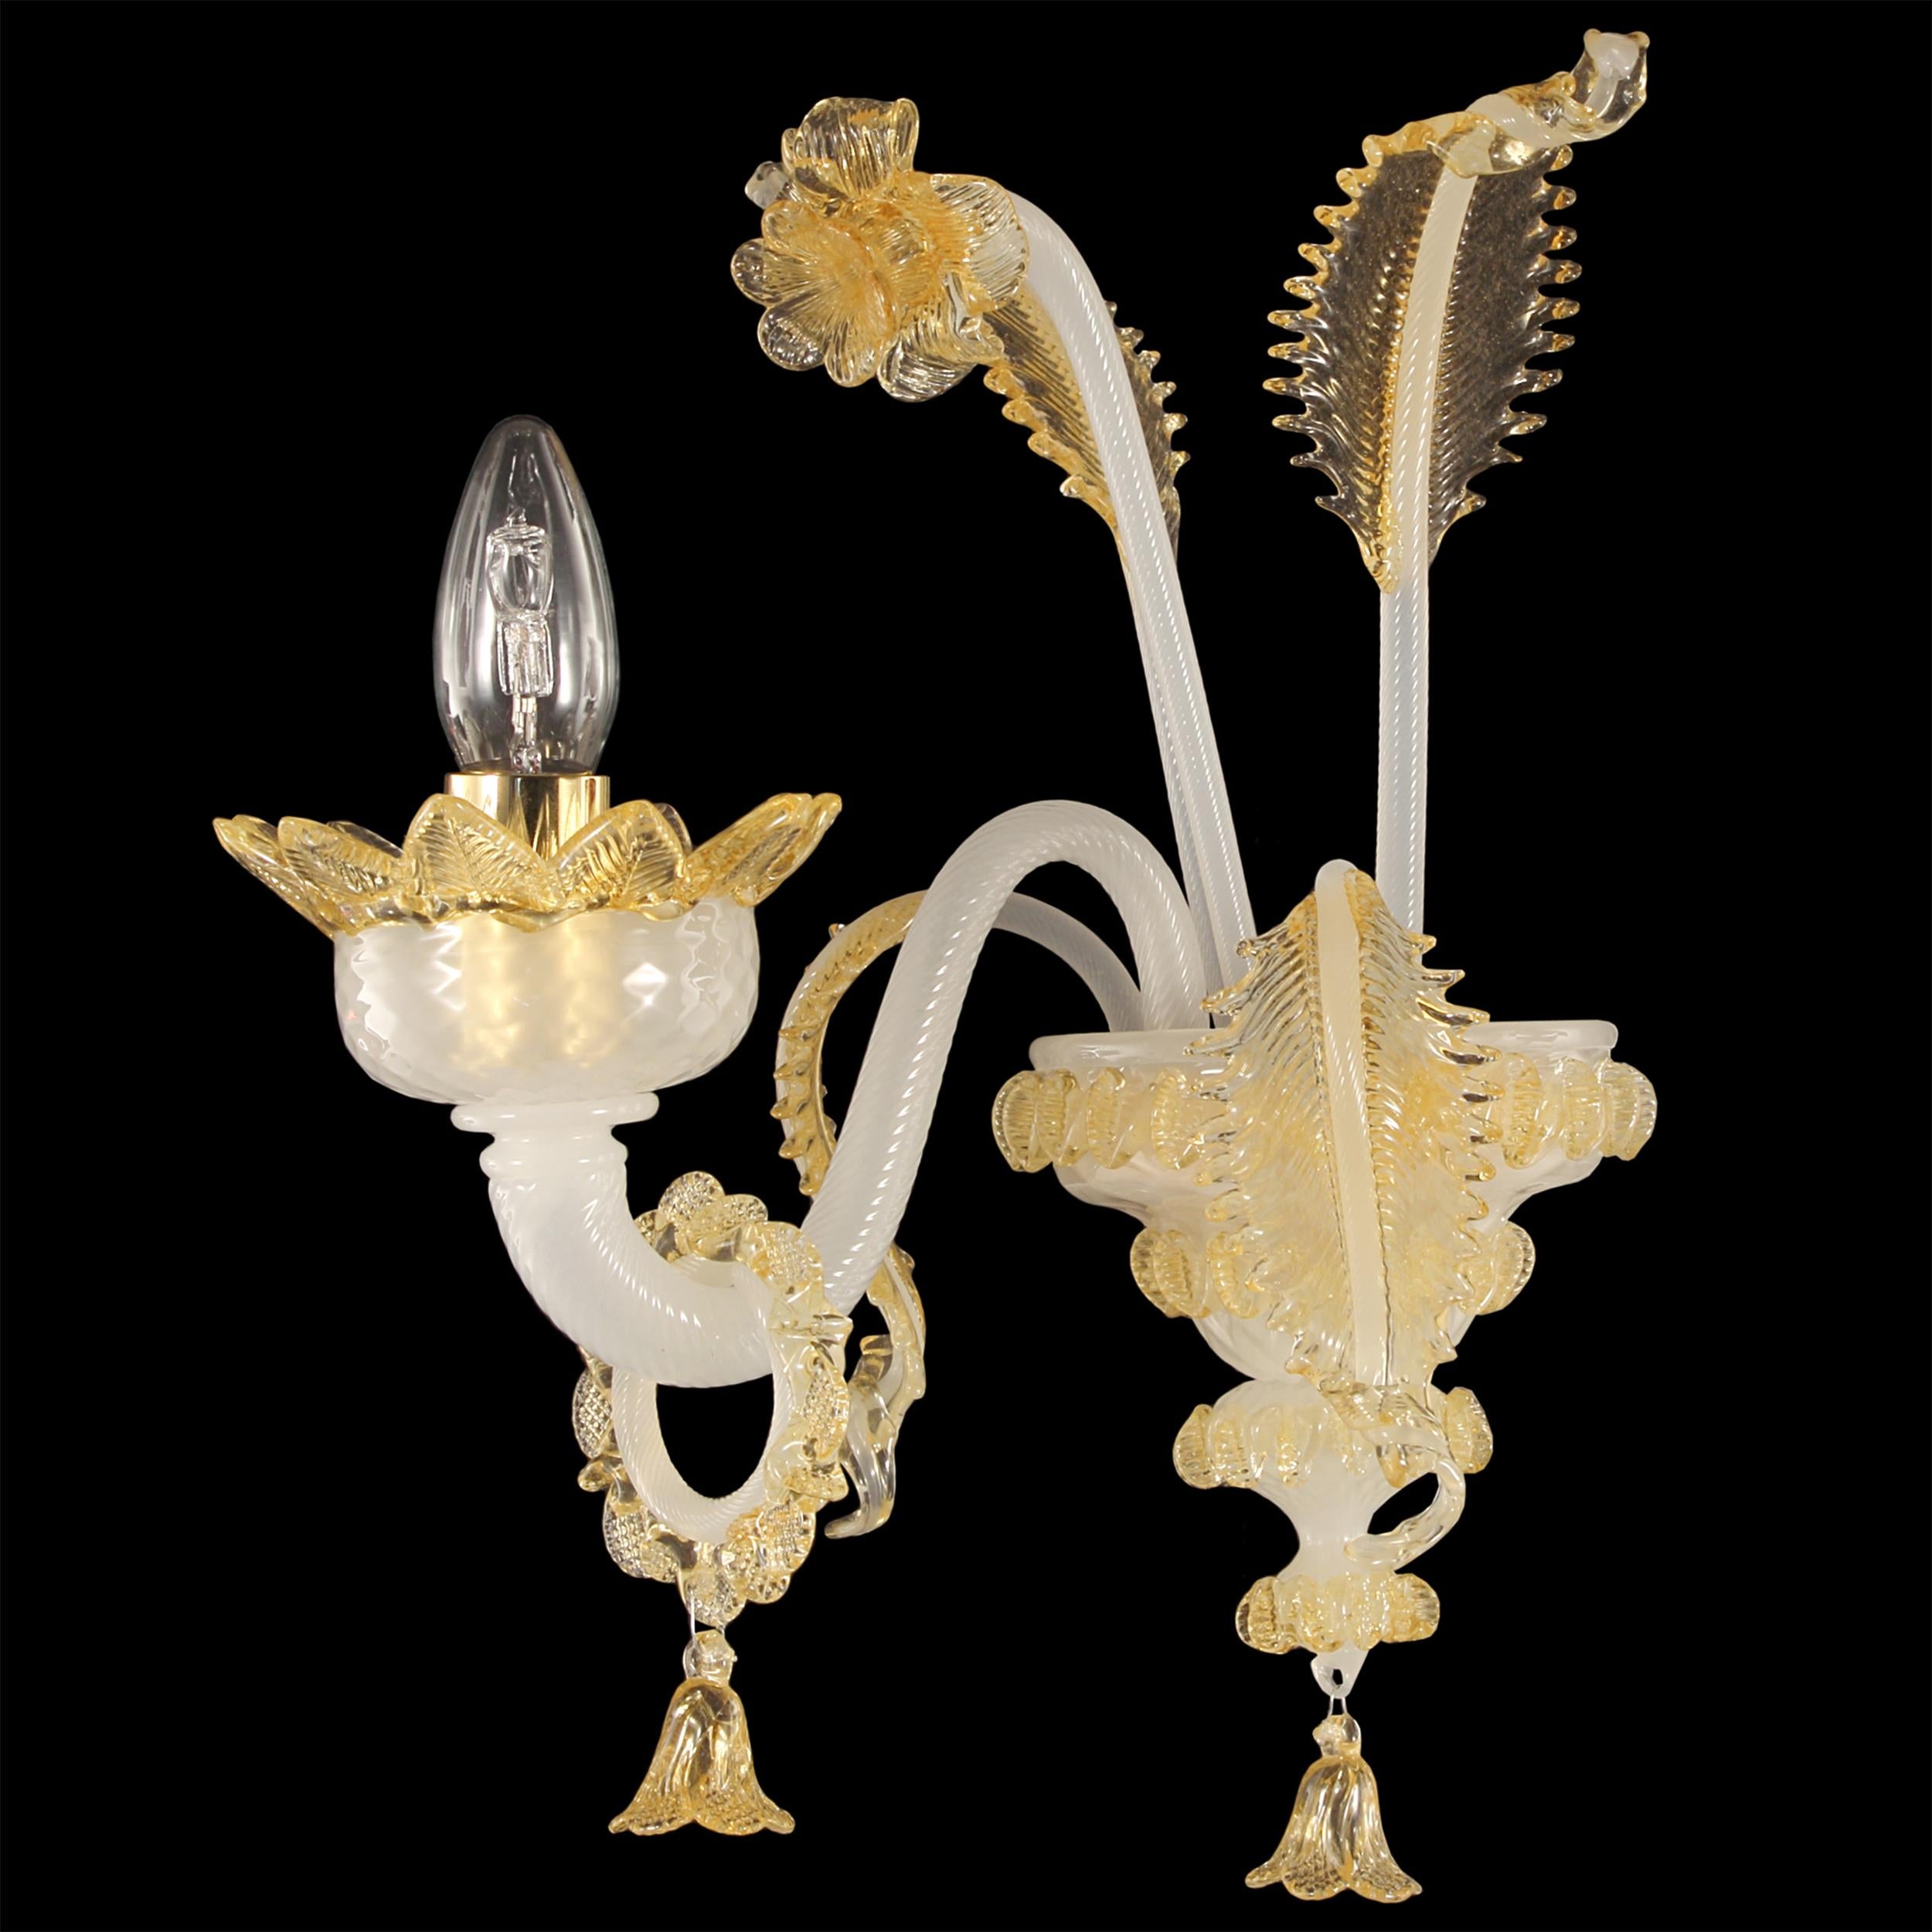 Classic Sconce 1 Arm white silk Murano Glass amber details and rings by Multiforme.
 V-Classic 800 is a collection designed with attention to details, and with the passion that makes us standing out. Each product (from the monumental chandeliers to